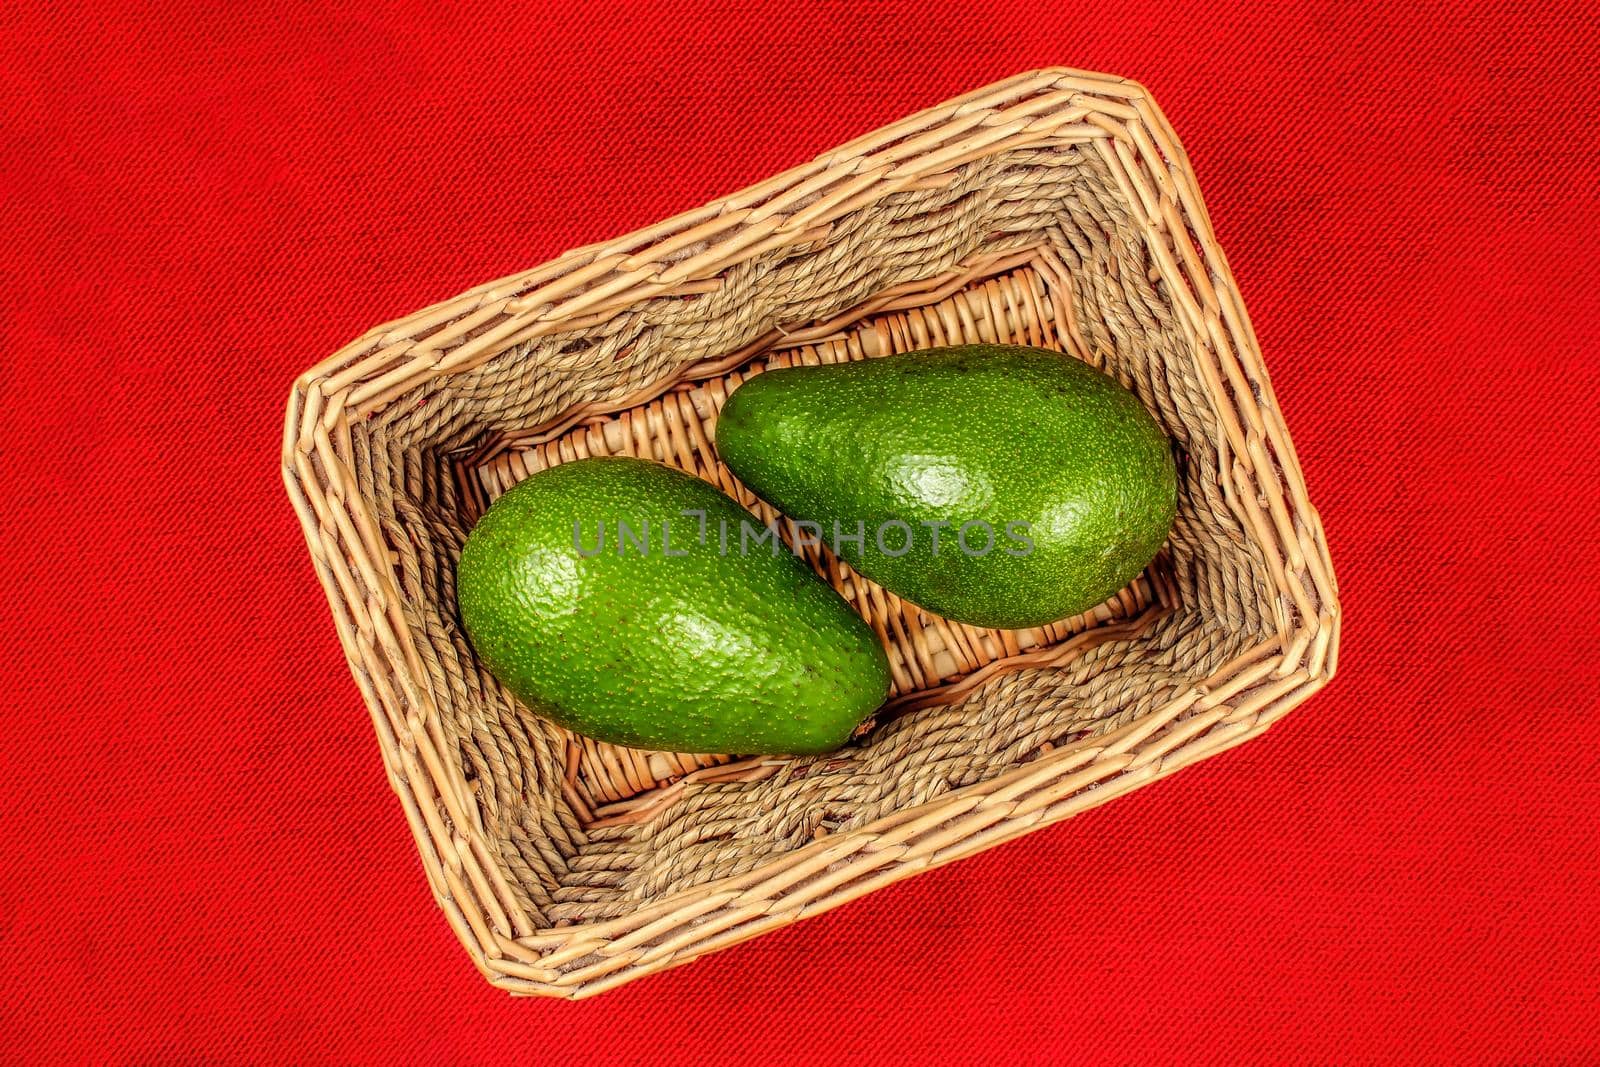 Table top view on two whole avocado fruits in basket, with red tablecloth under it.